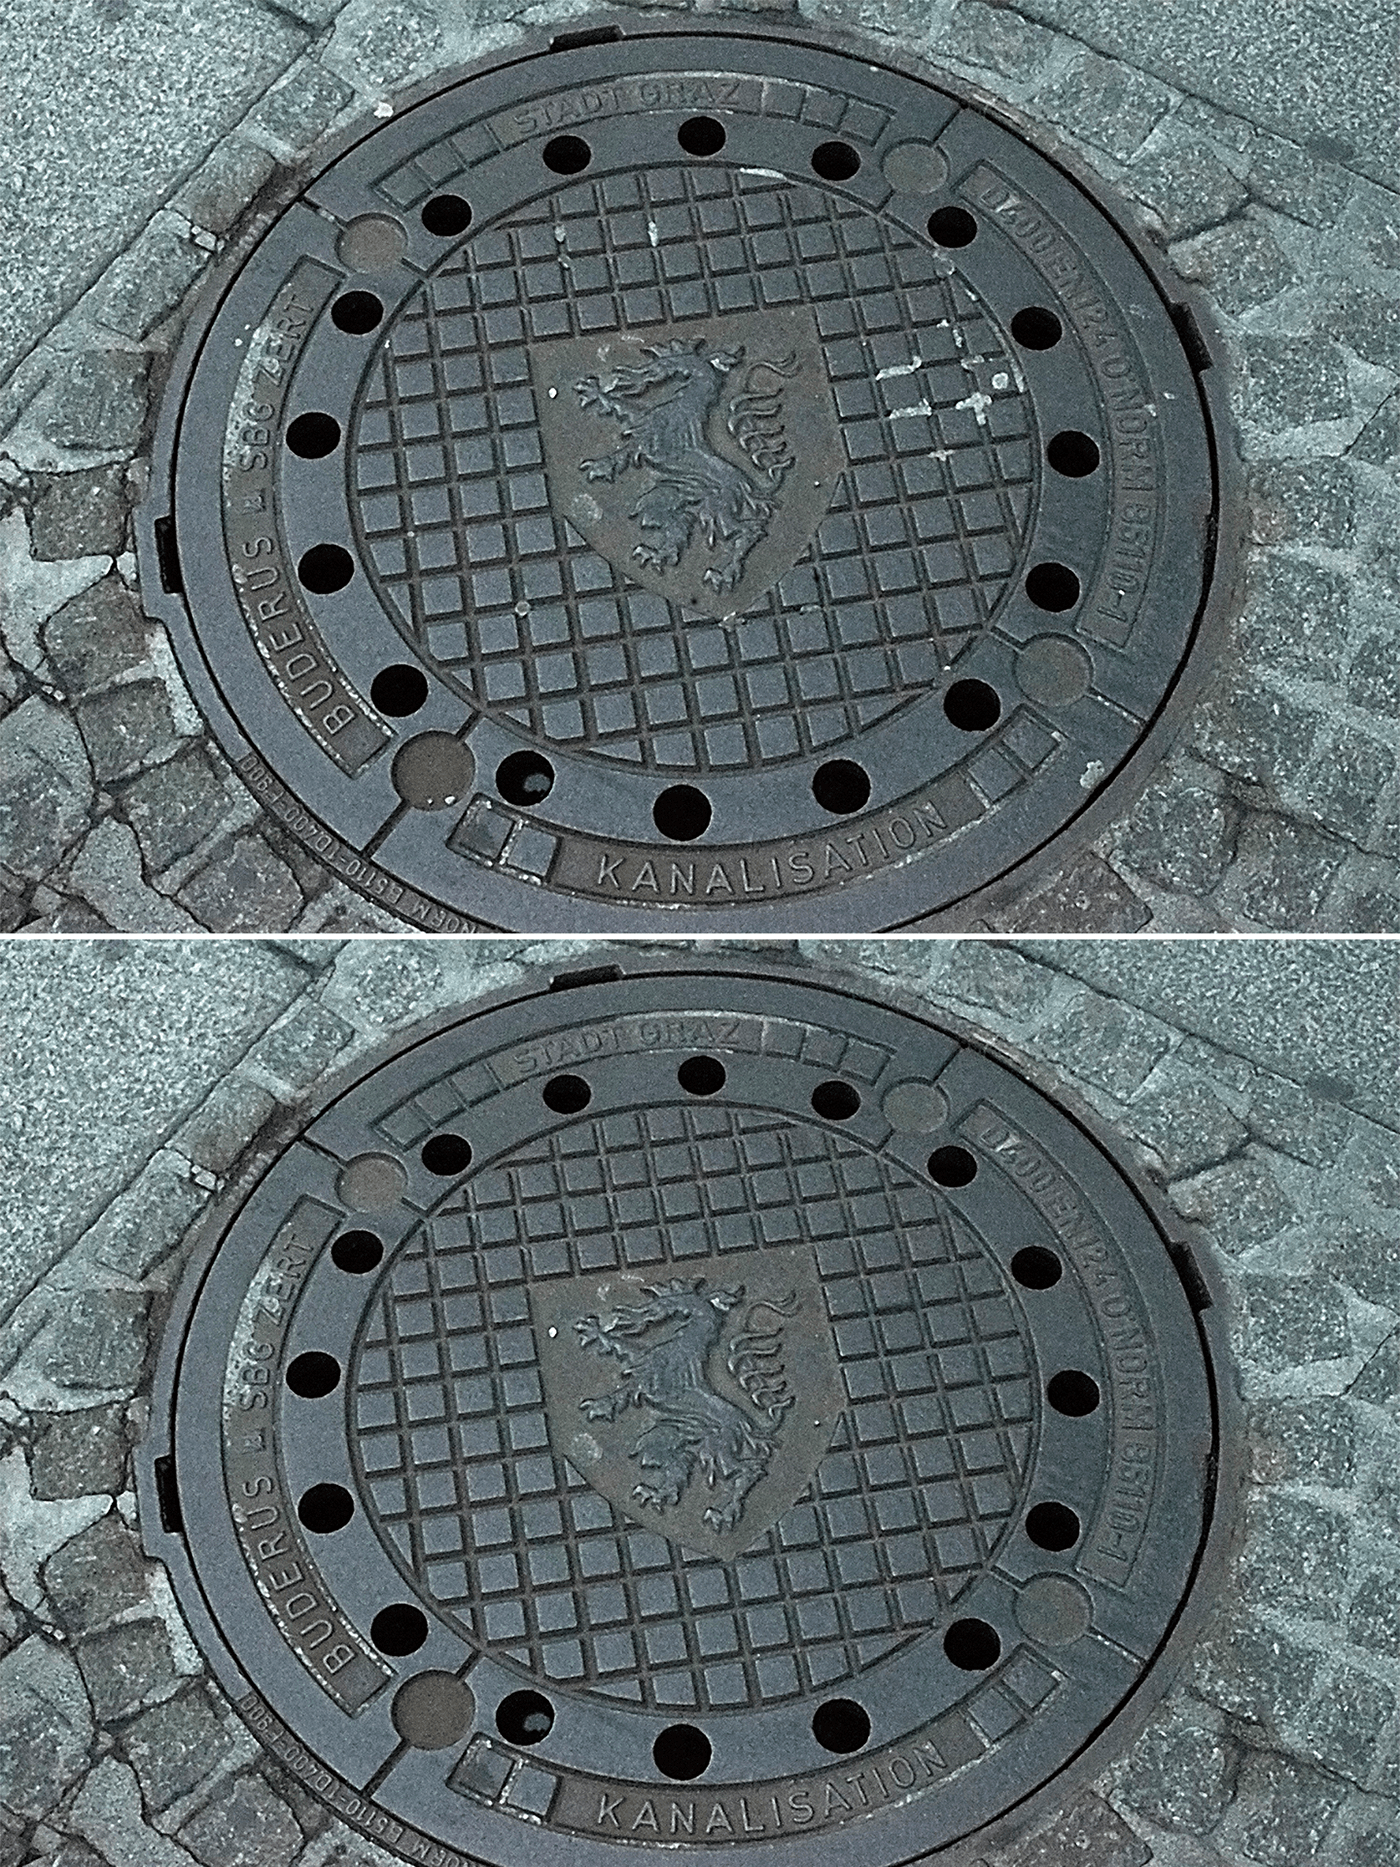 Before and After cover manhole sewer